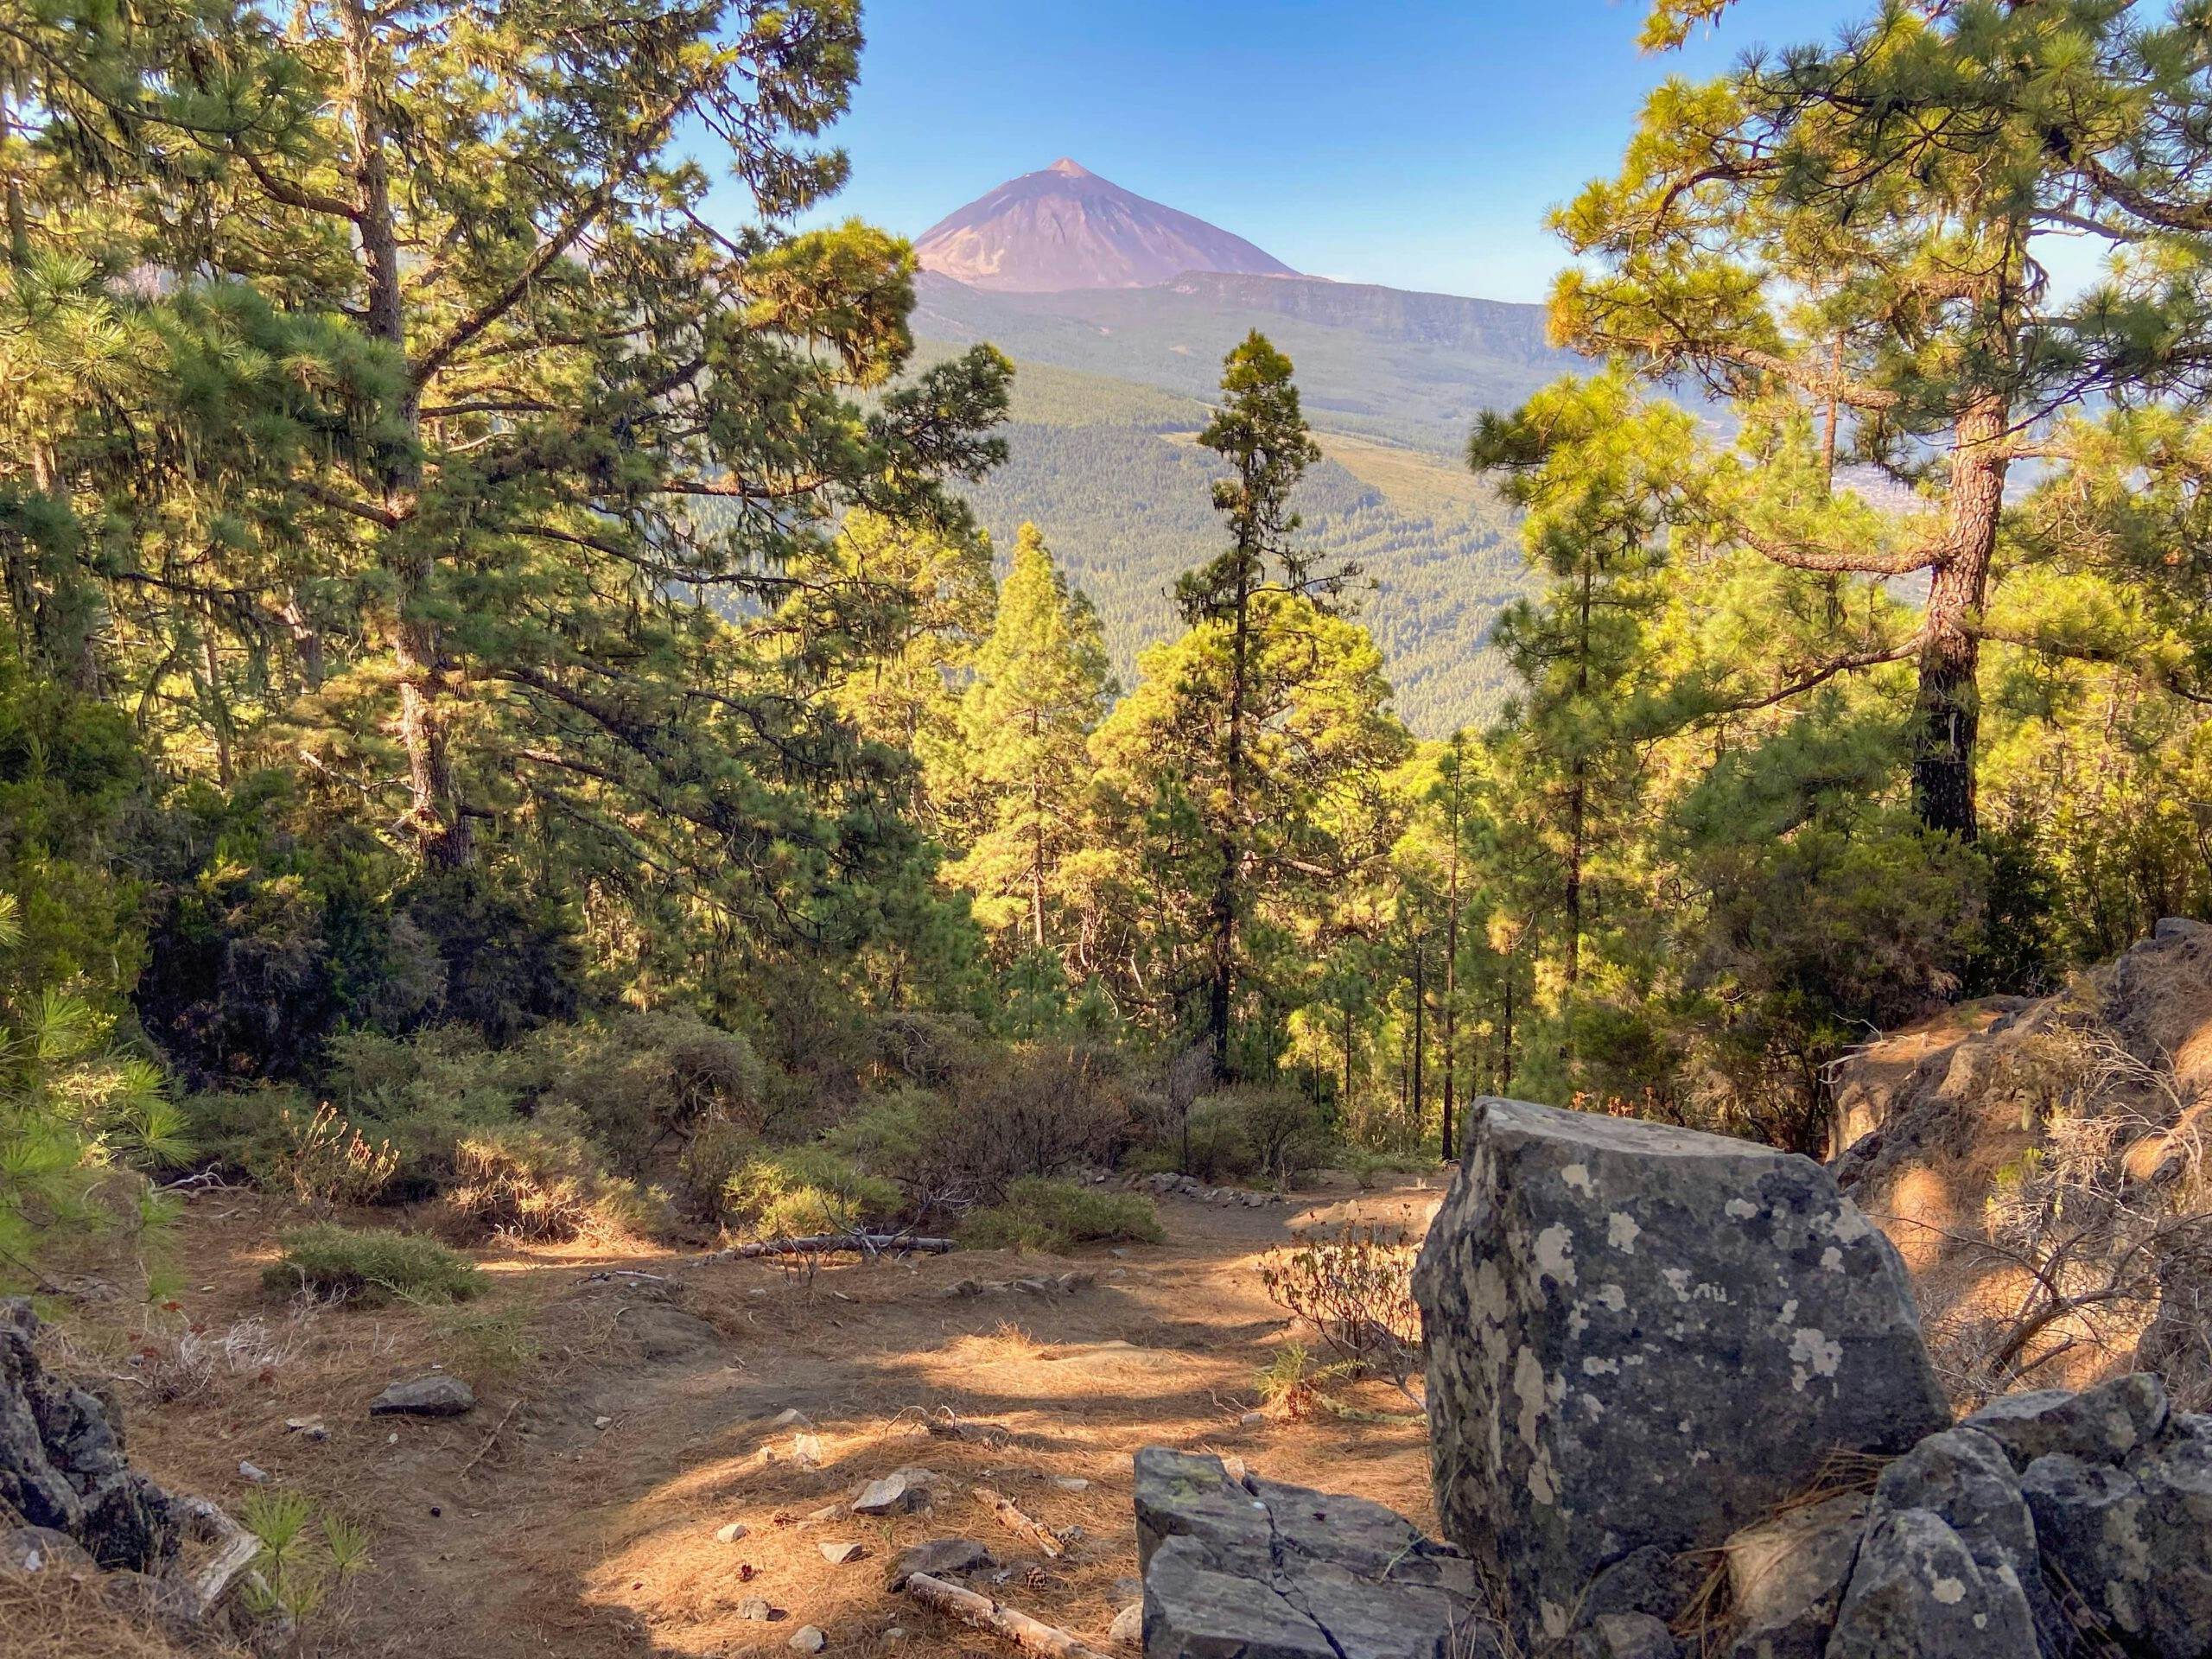 View from the hiking trail to the Teide